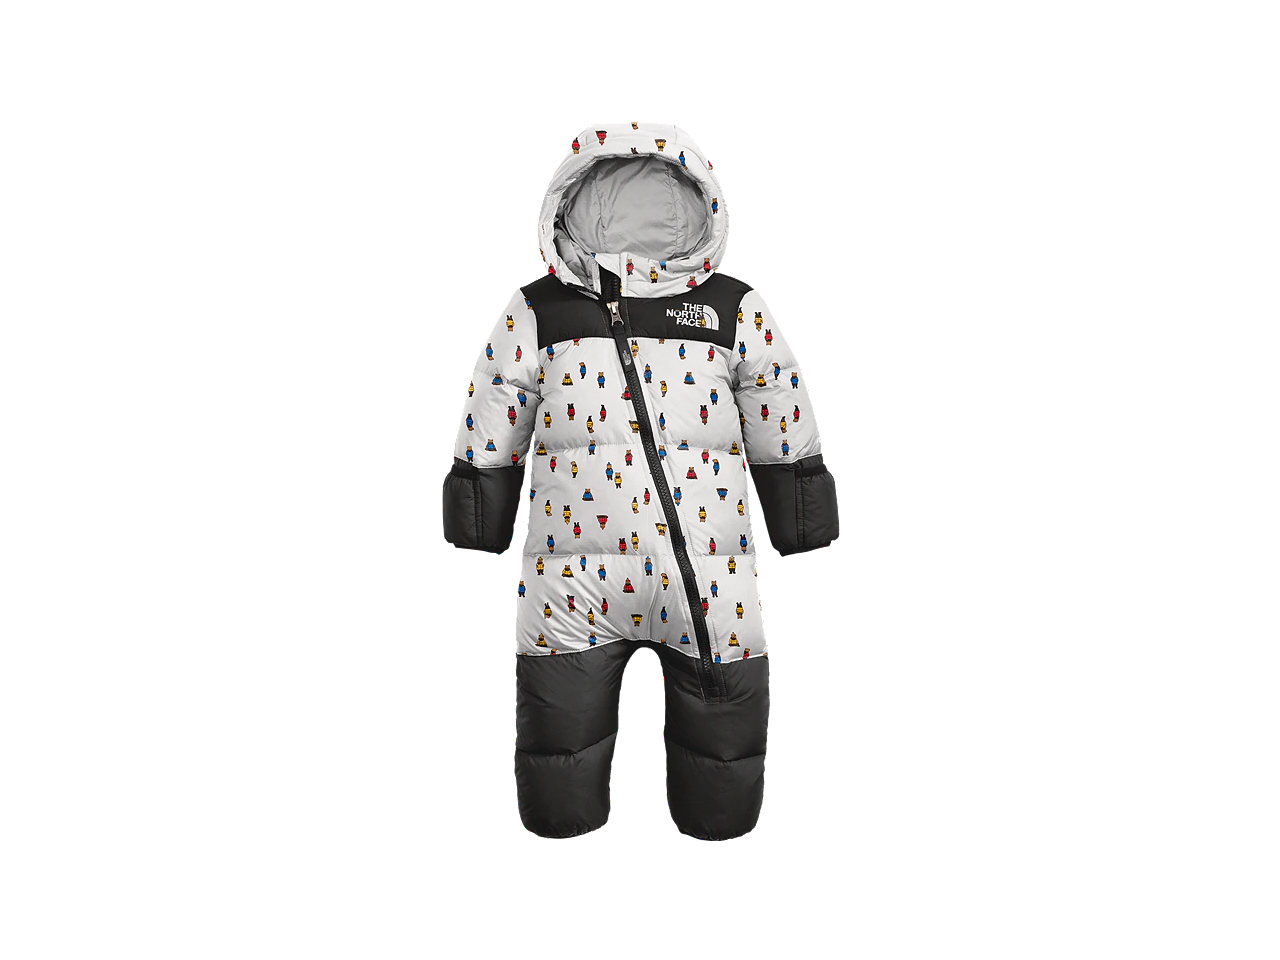 north face baby winter suit